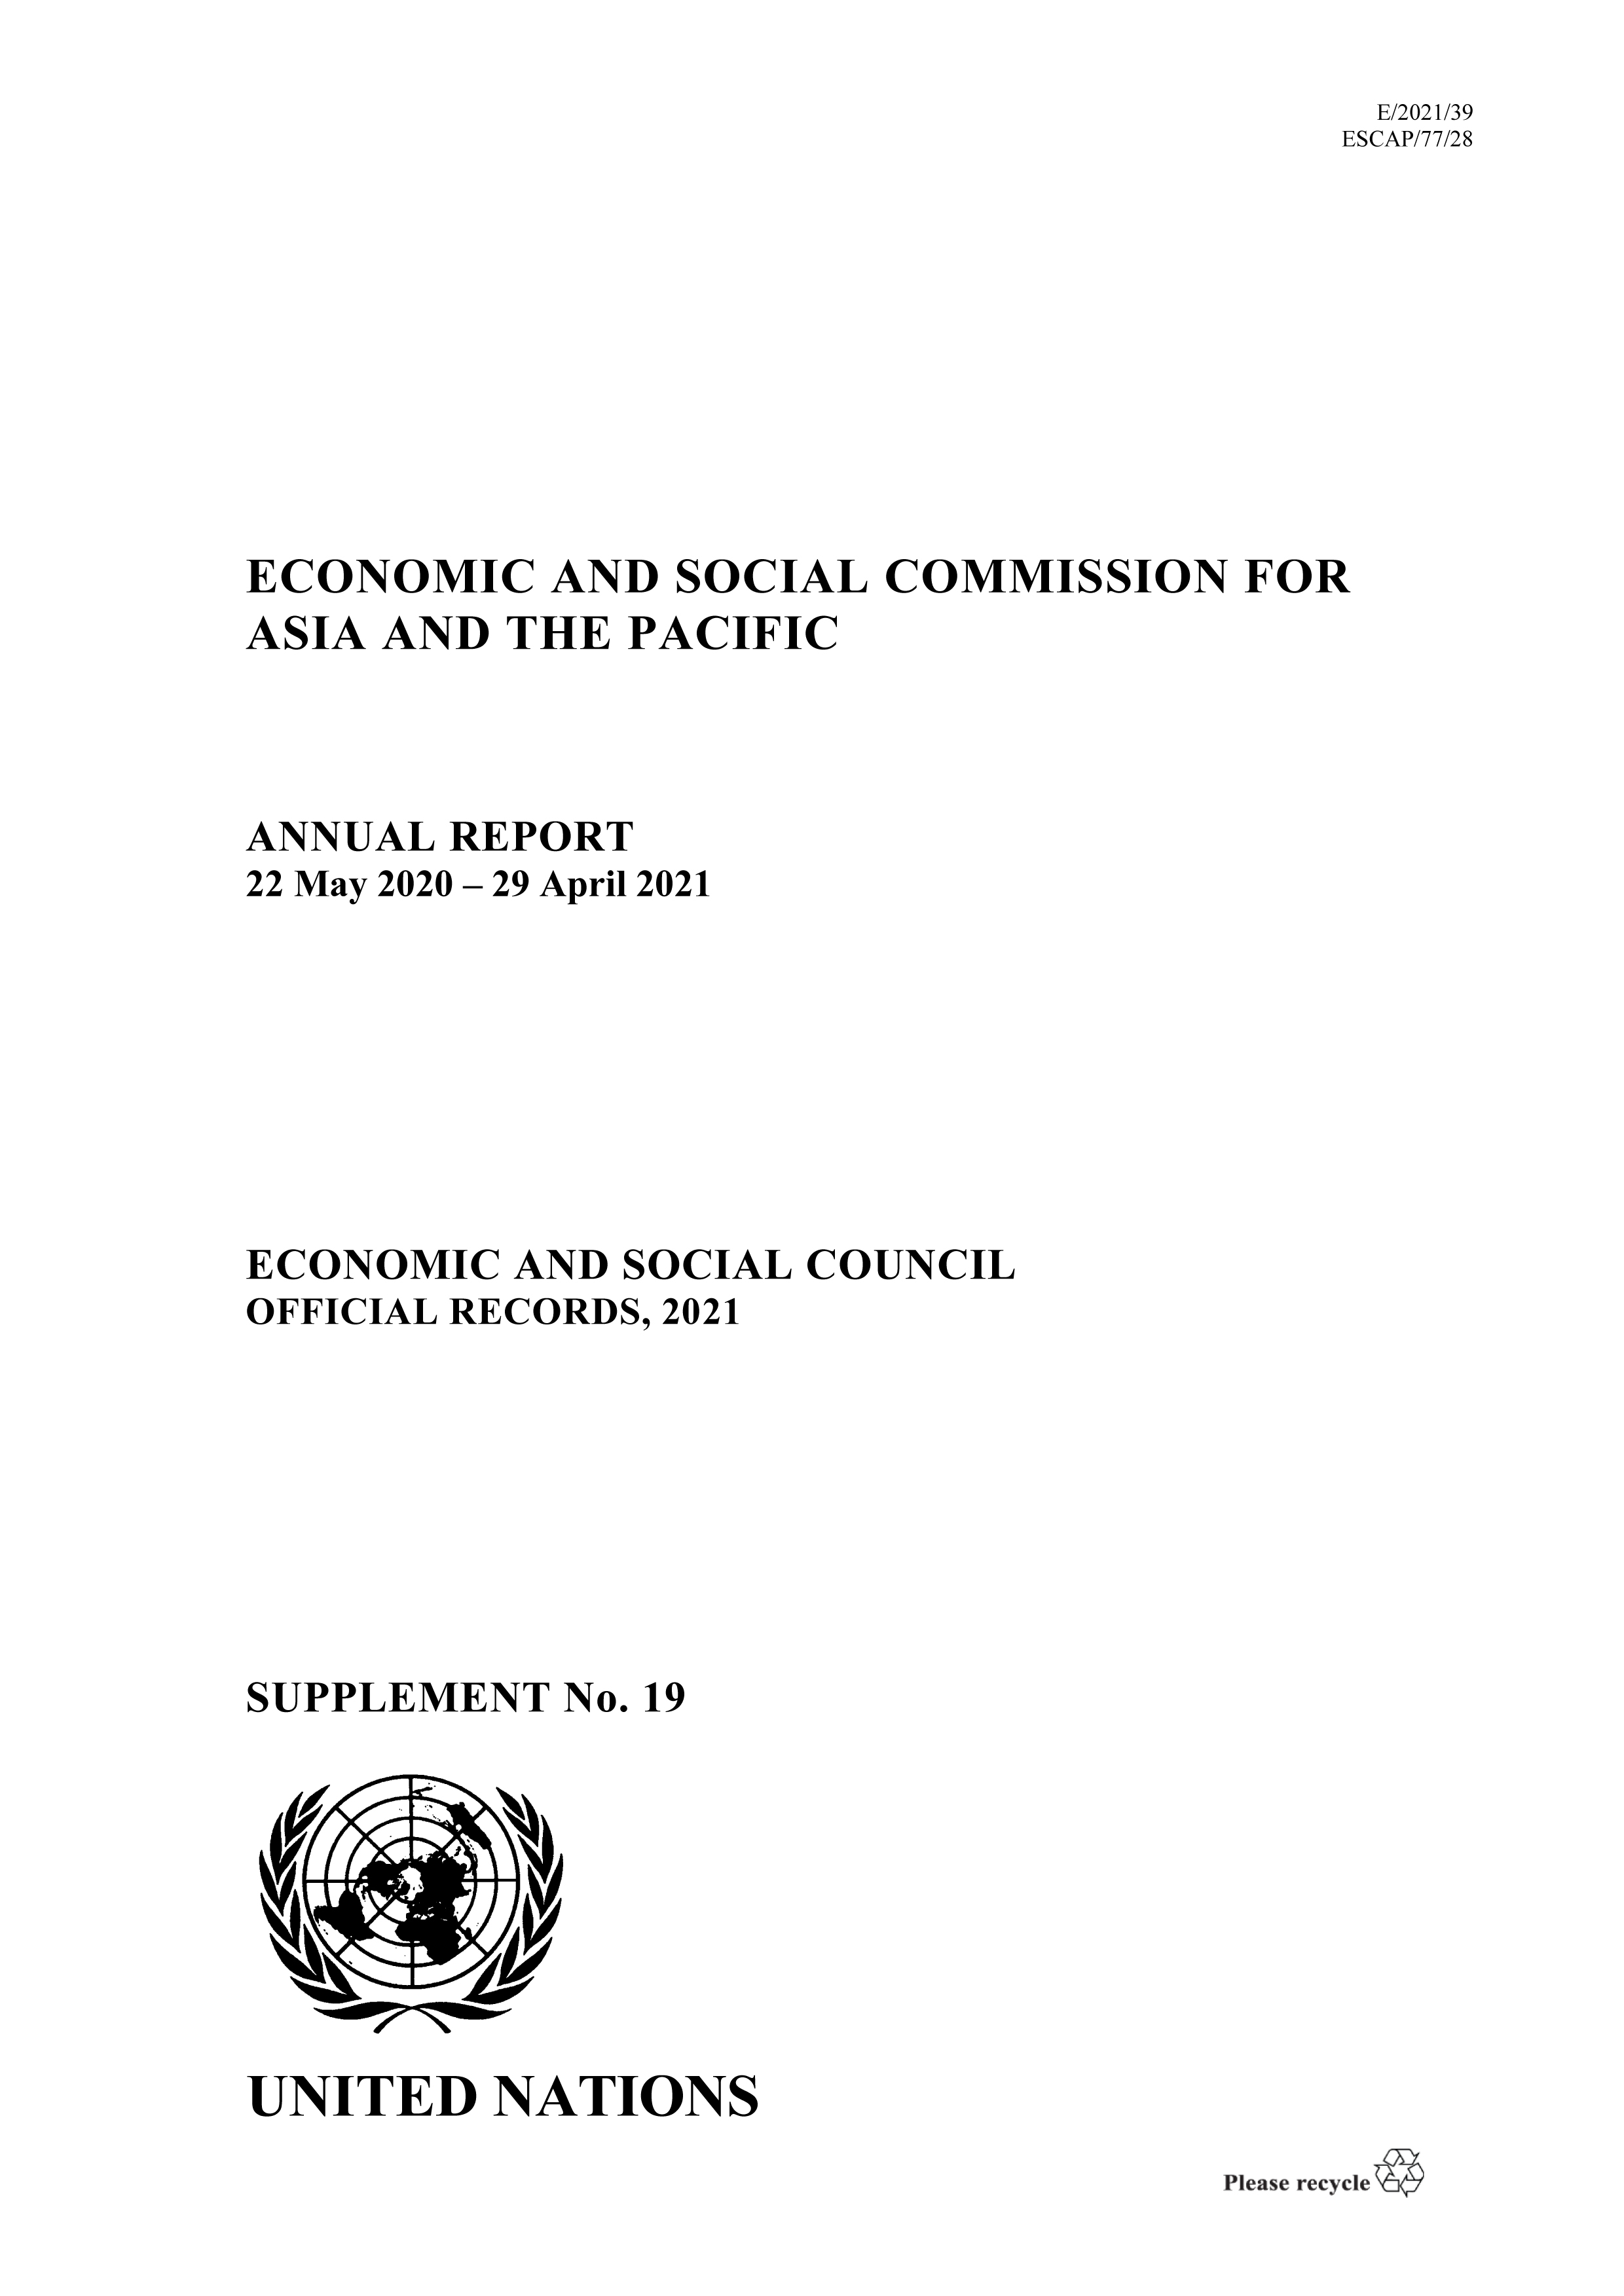 image of Annual Report of the Economic and Social Commission for Asia and the Pacific 2021